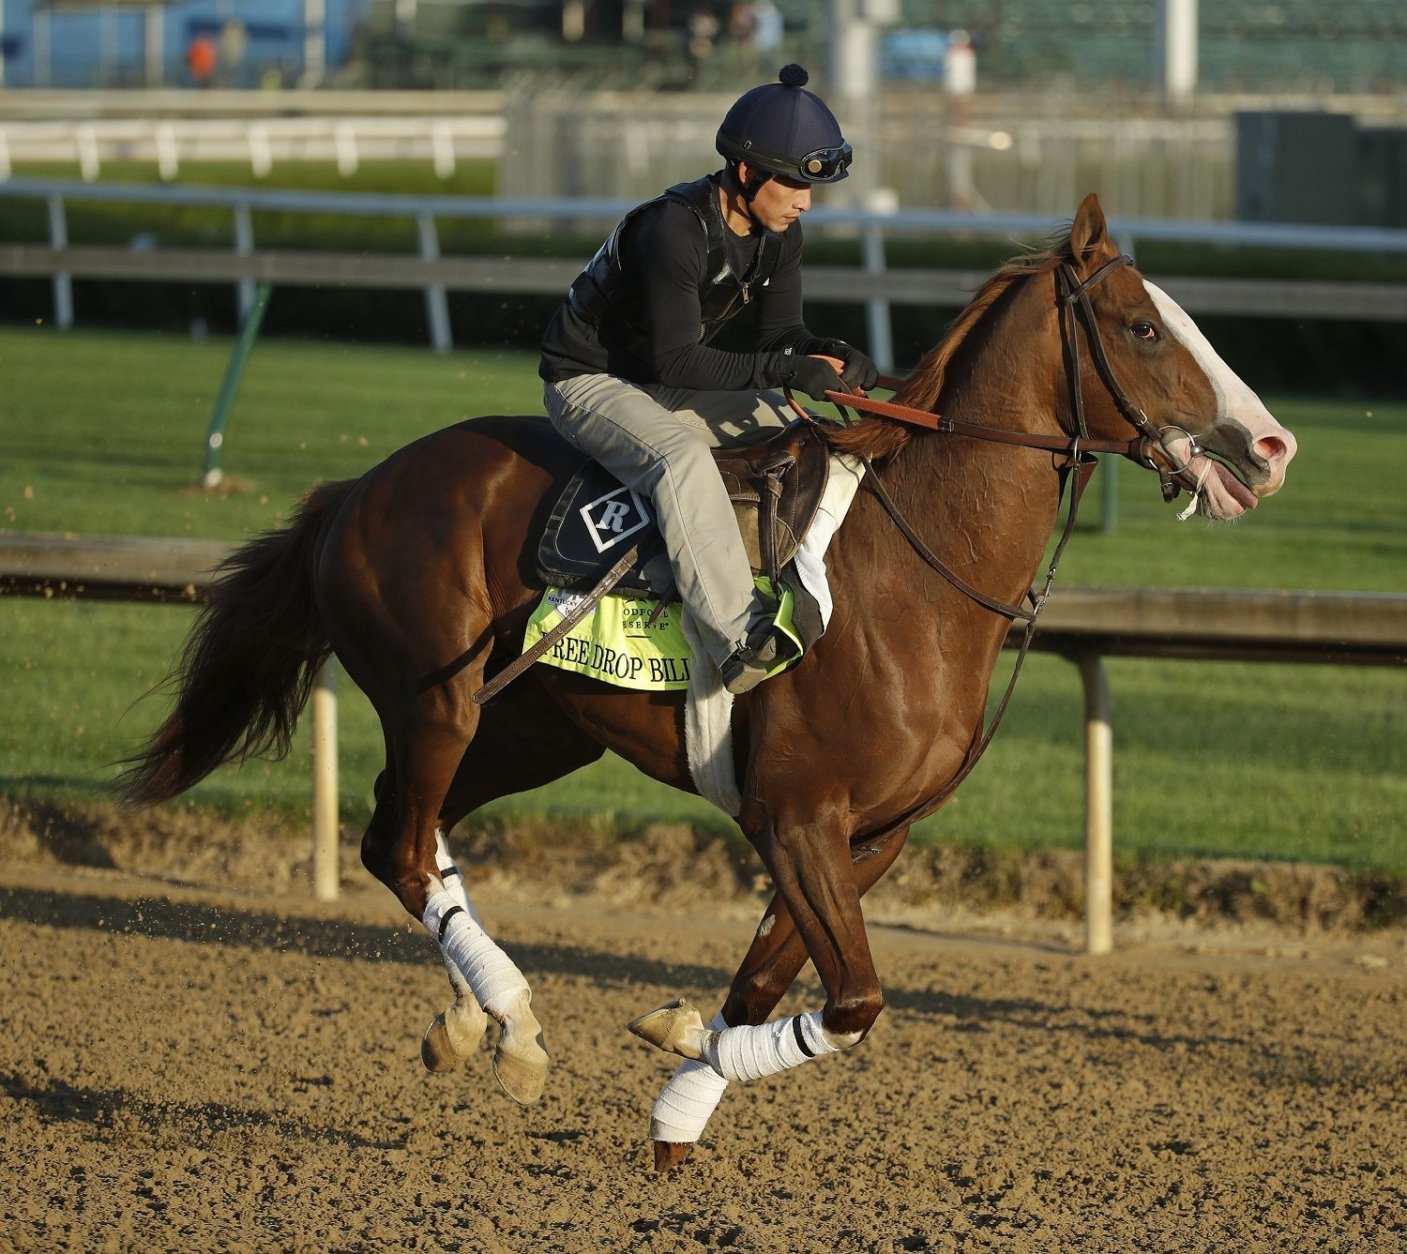 Kentucky Derby hopeful Free Drop Billy runs during a morning workout at Churchill Downs Tuesday, May 1, 2018, in Louisville, Ky. The 144th running of the Kentucky Derby is scheduled for Saturday, May 5. (AP Photo/Charlie Riedel)